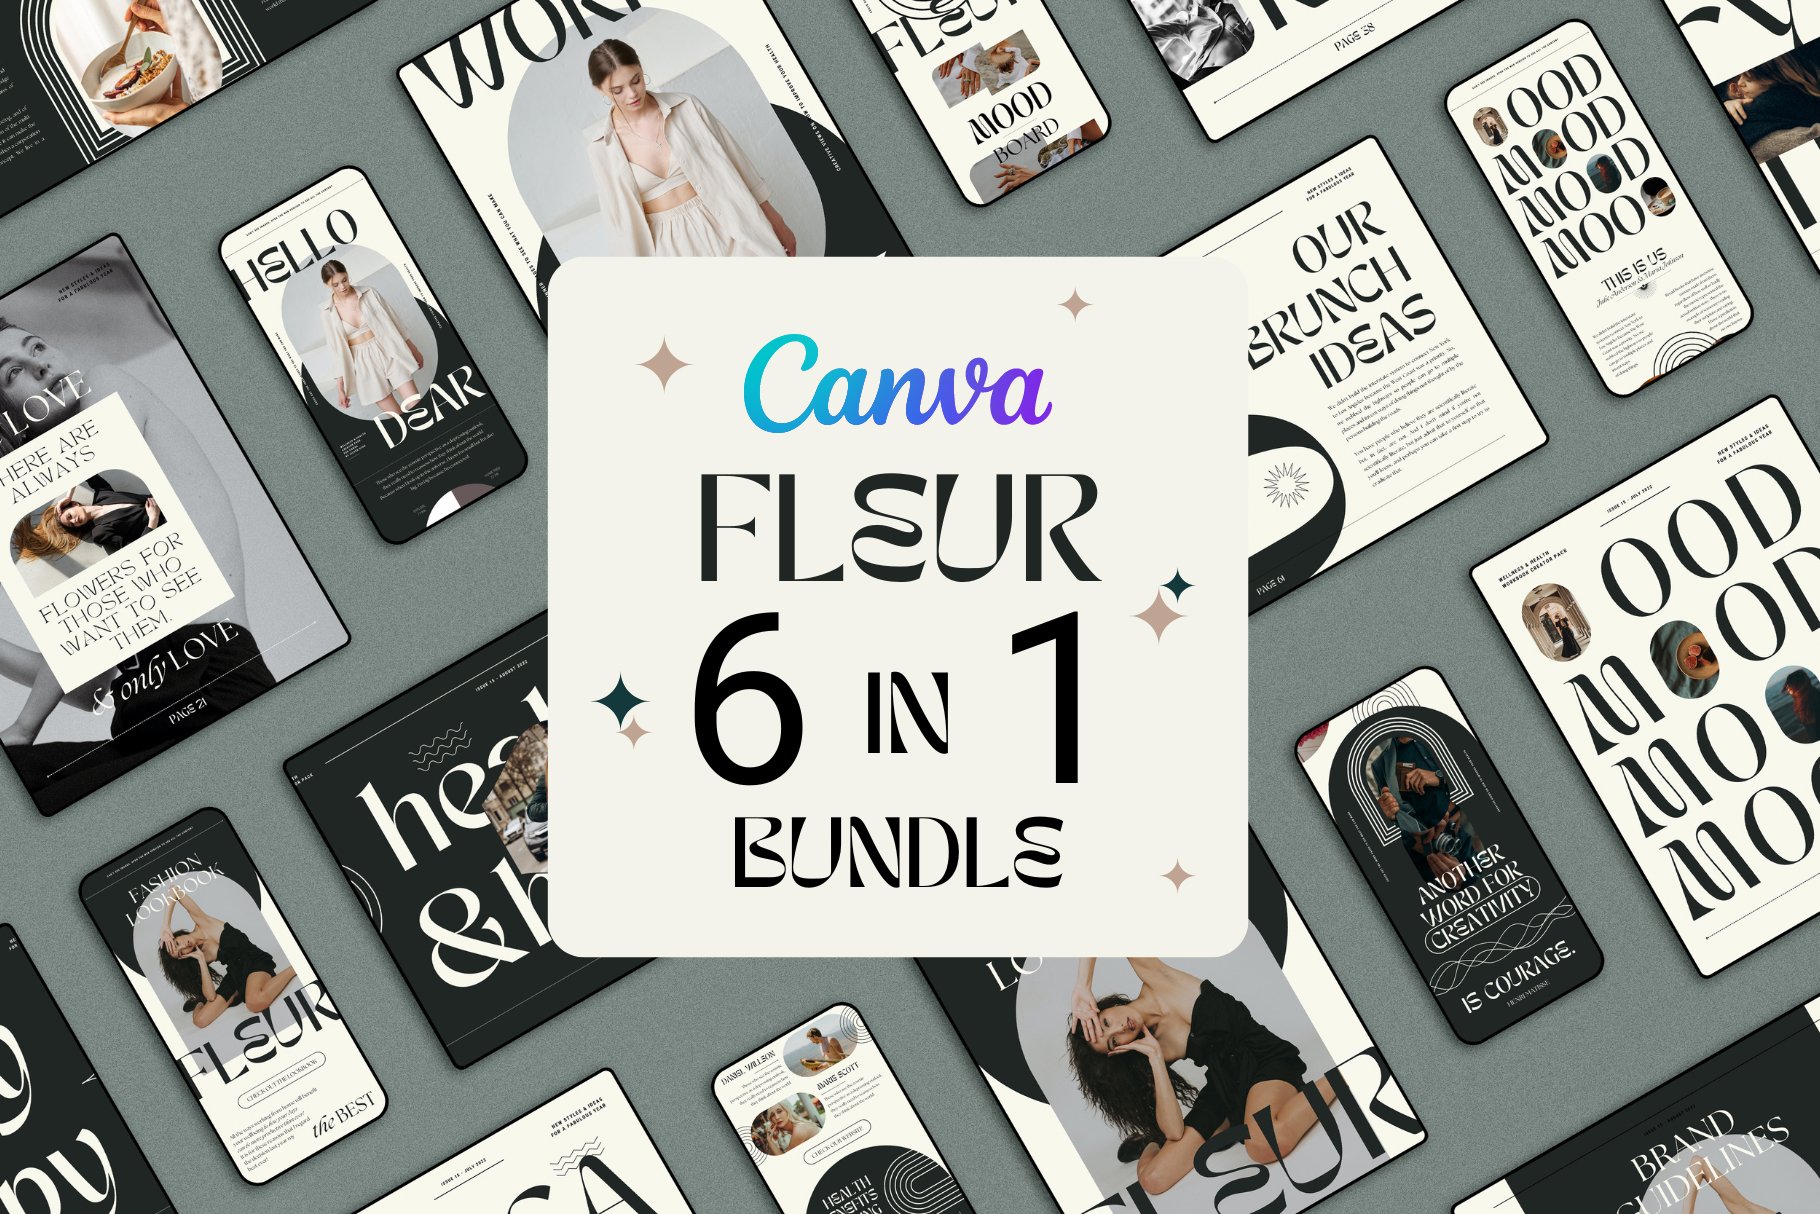 Fleur_6_in_1_Canva_Creator_Pack_by_SilverStag